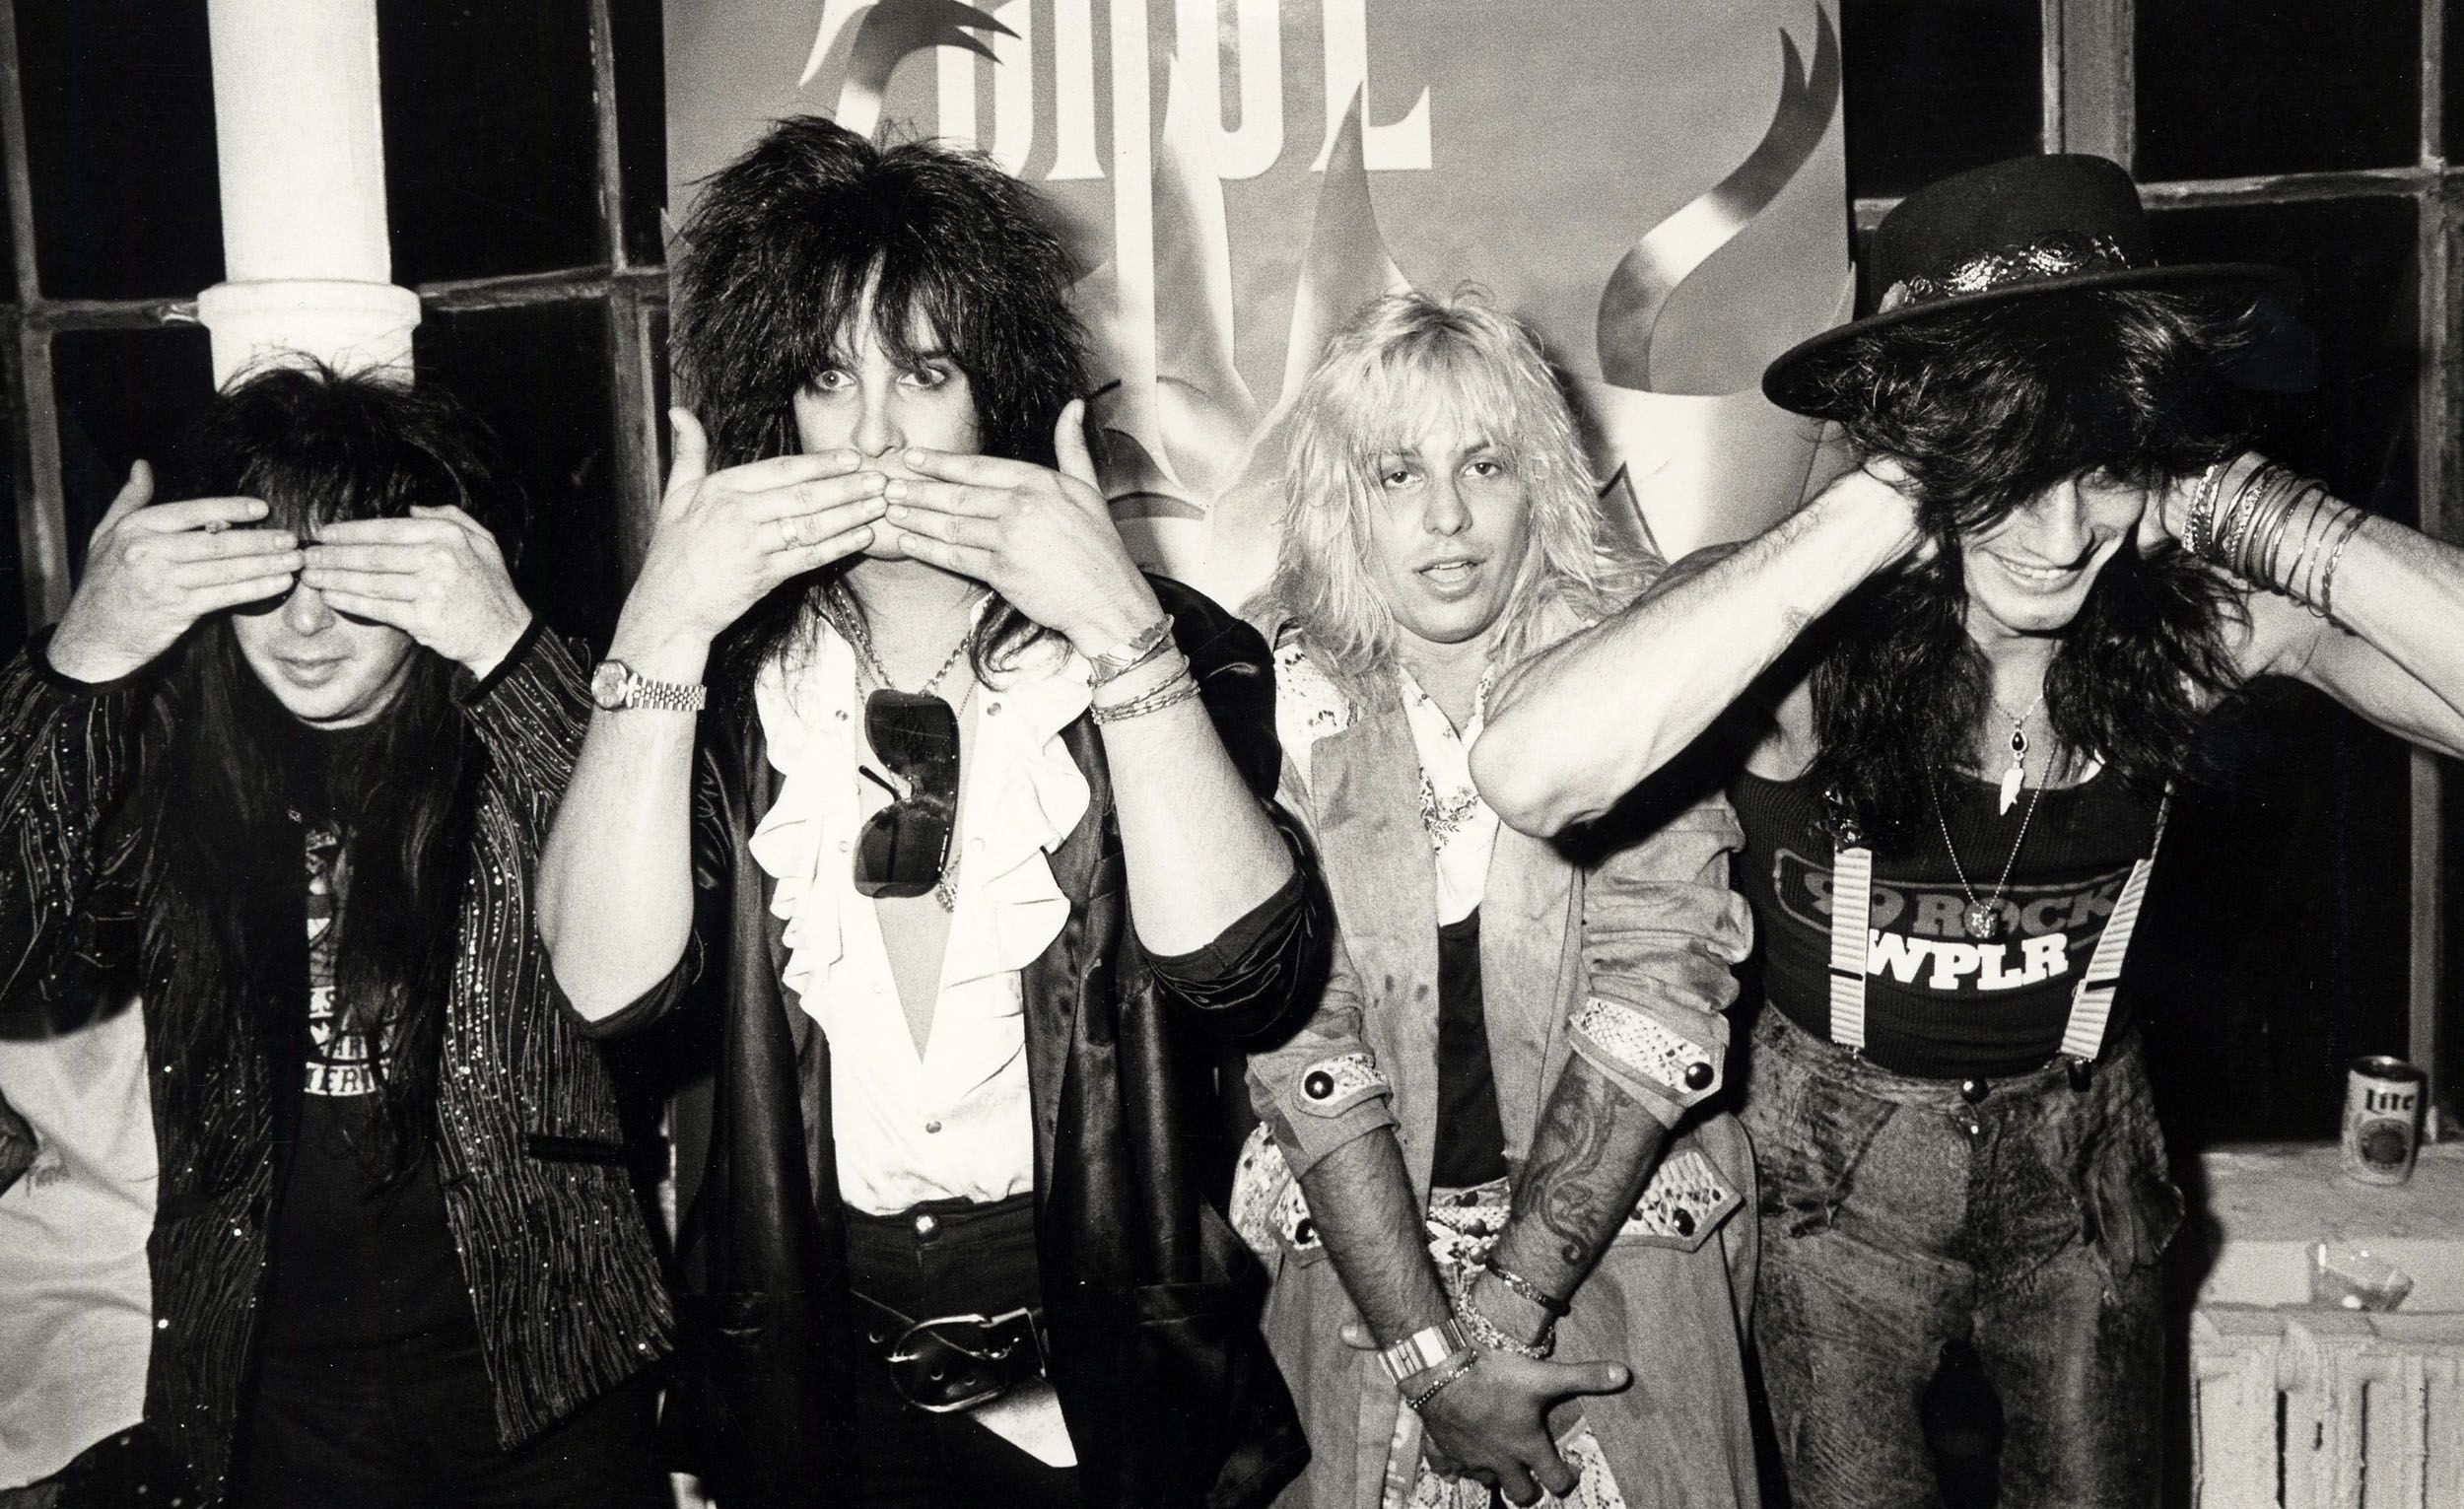 HD wallpaper, Motley Crue Photos   Pictures Of Motley Crue Partying And Playing Music In The 1980S 2500X1540, Desktop Hd Mick Mars Background